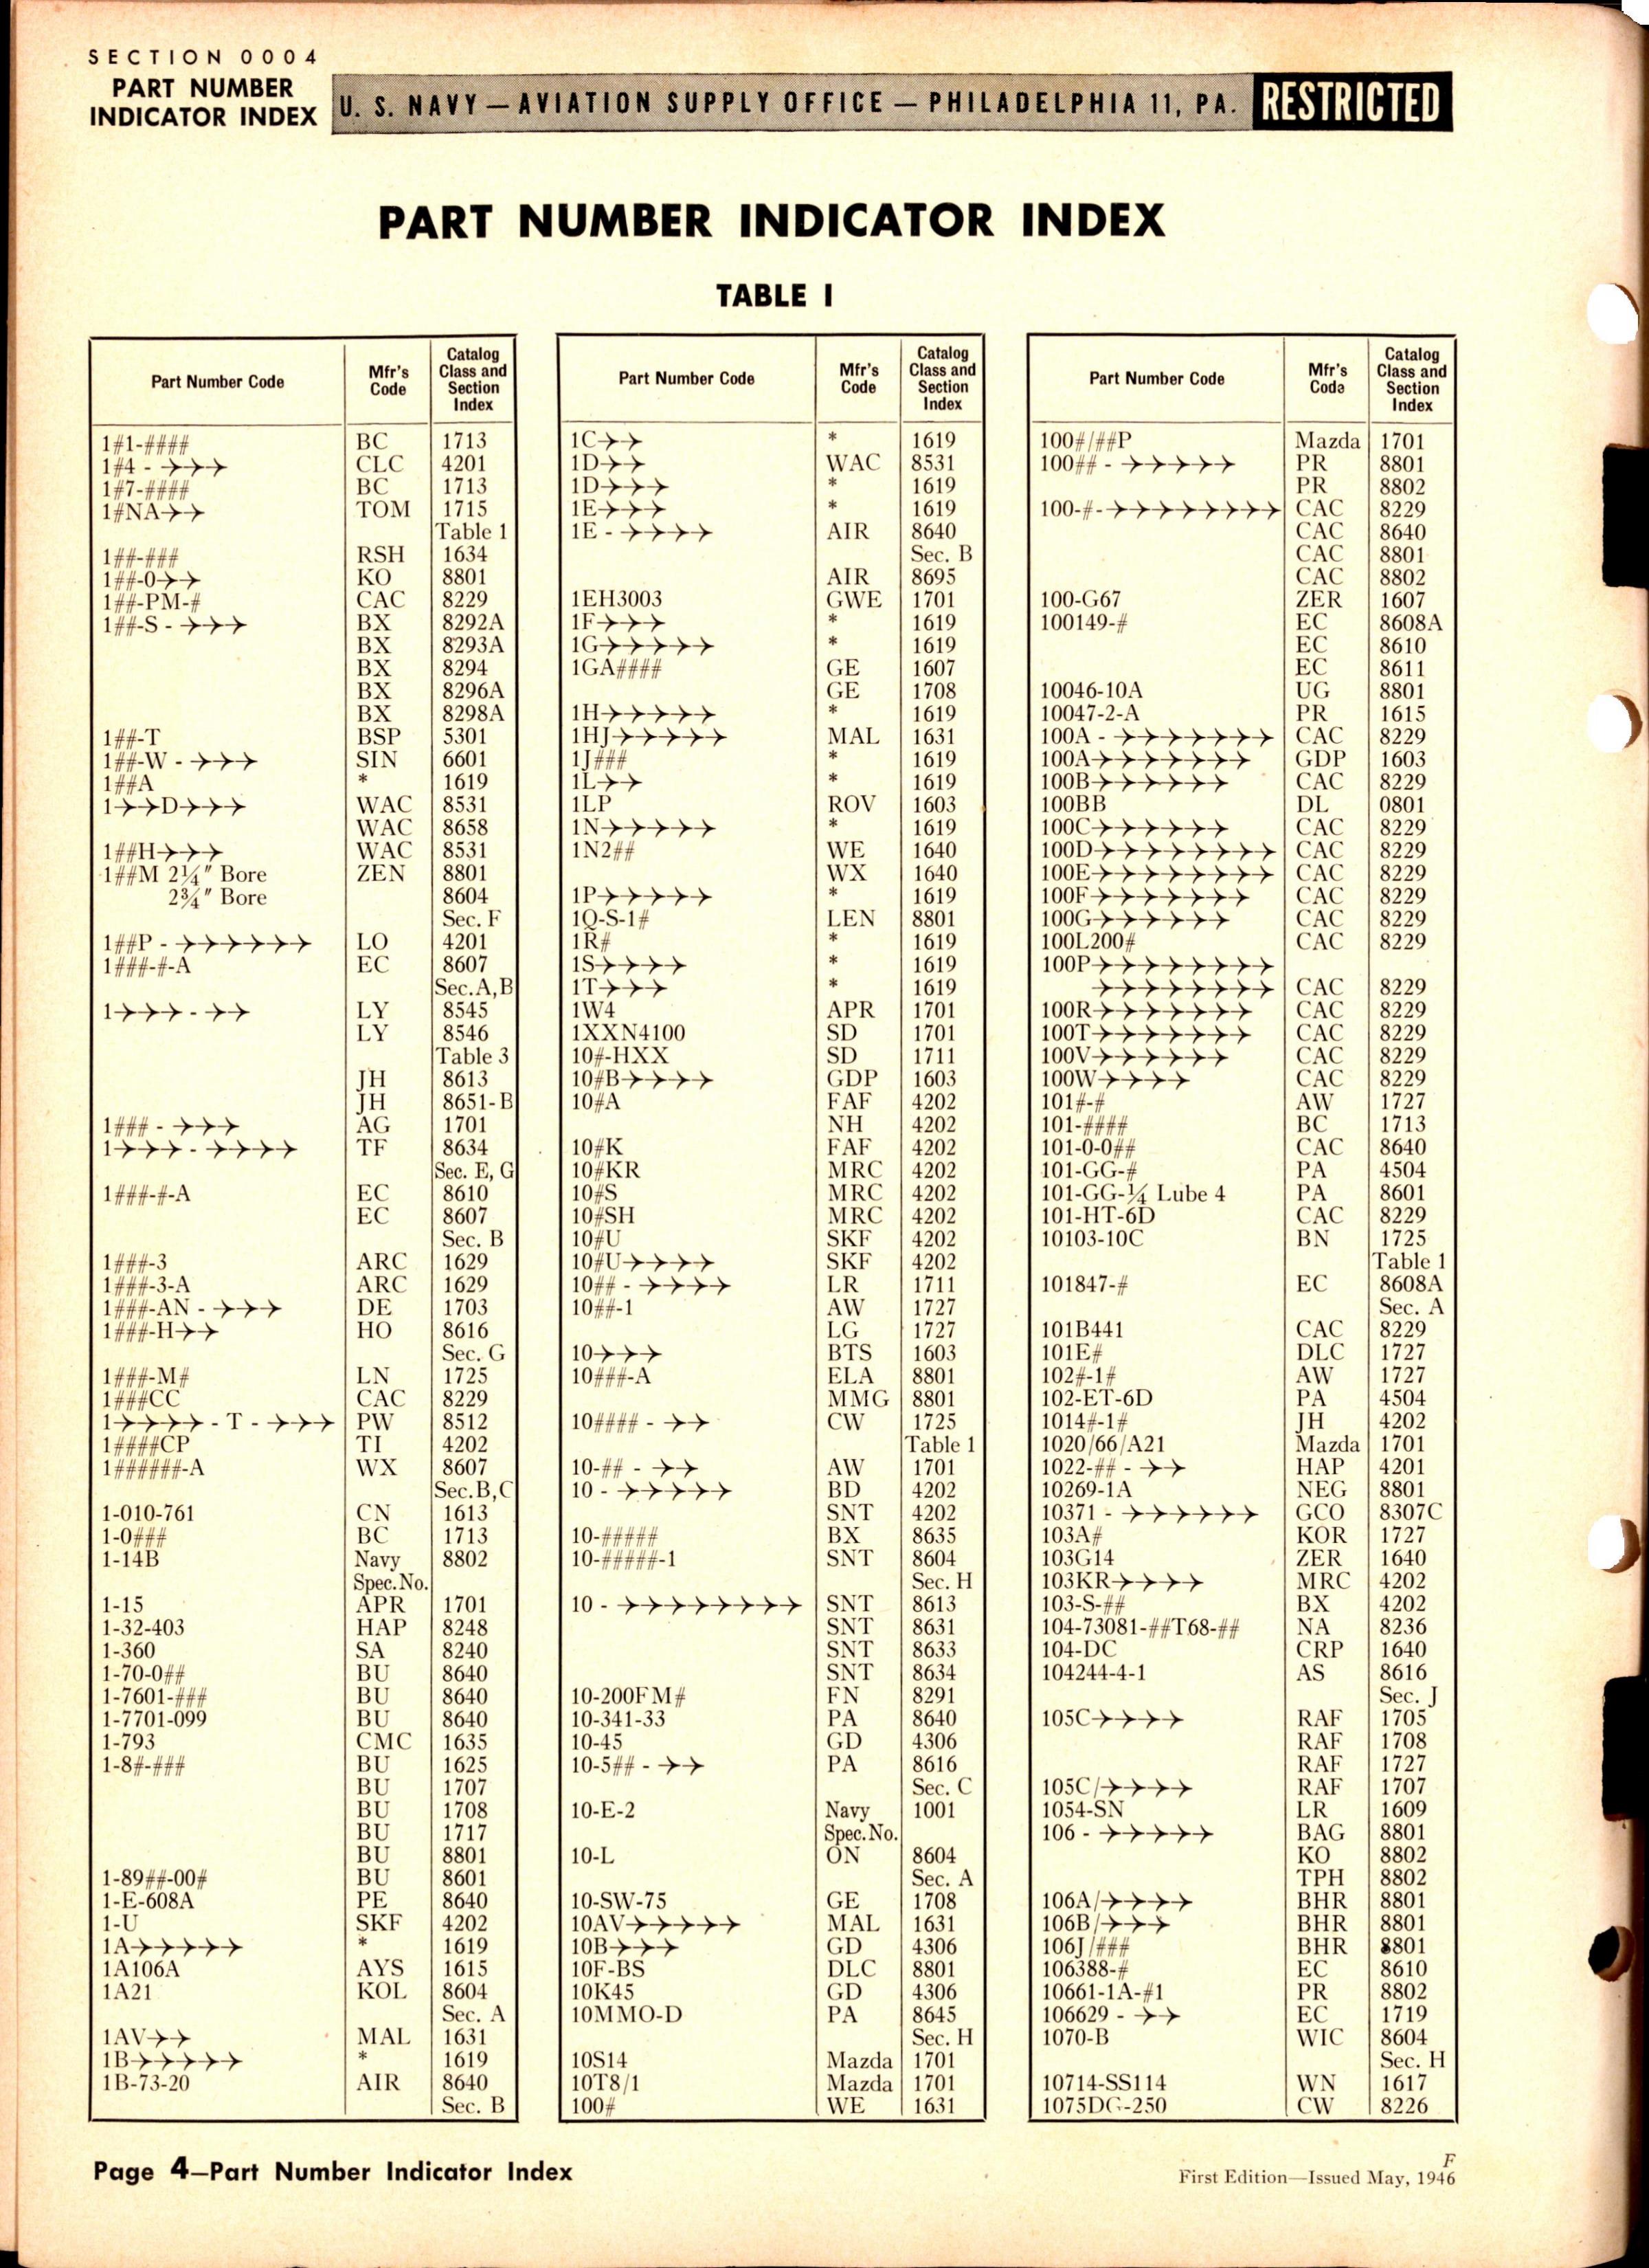 Sample page 4 from AirCorps Library document: Part No. Indicator Index